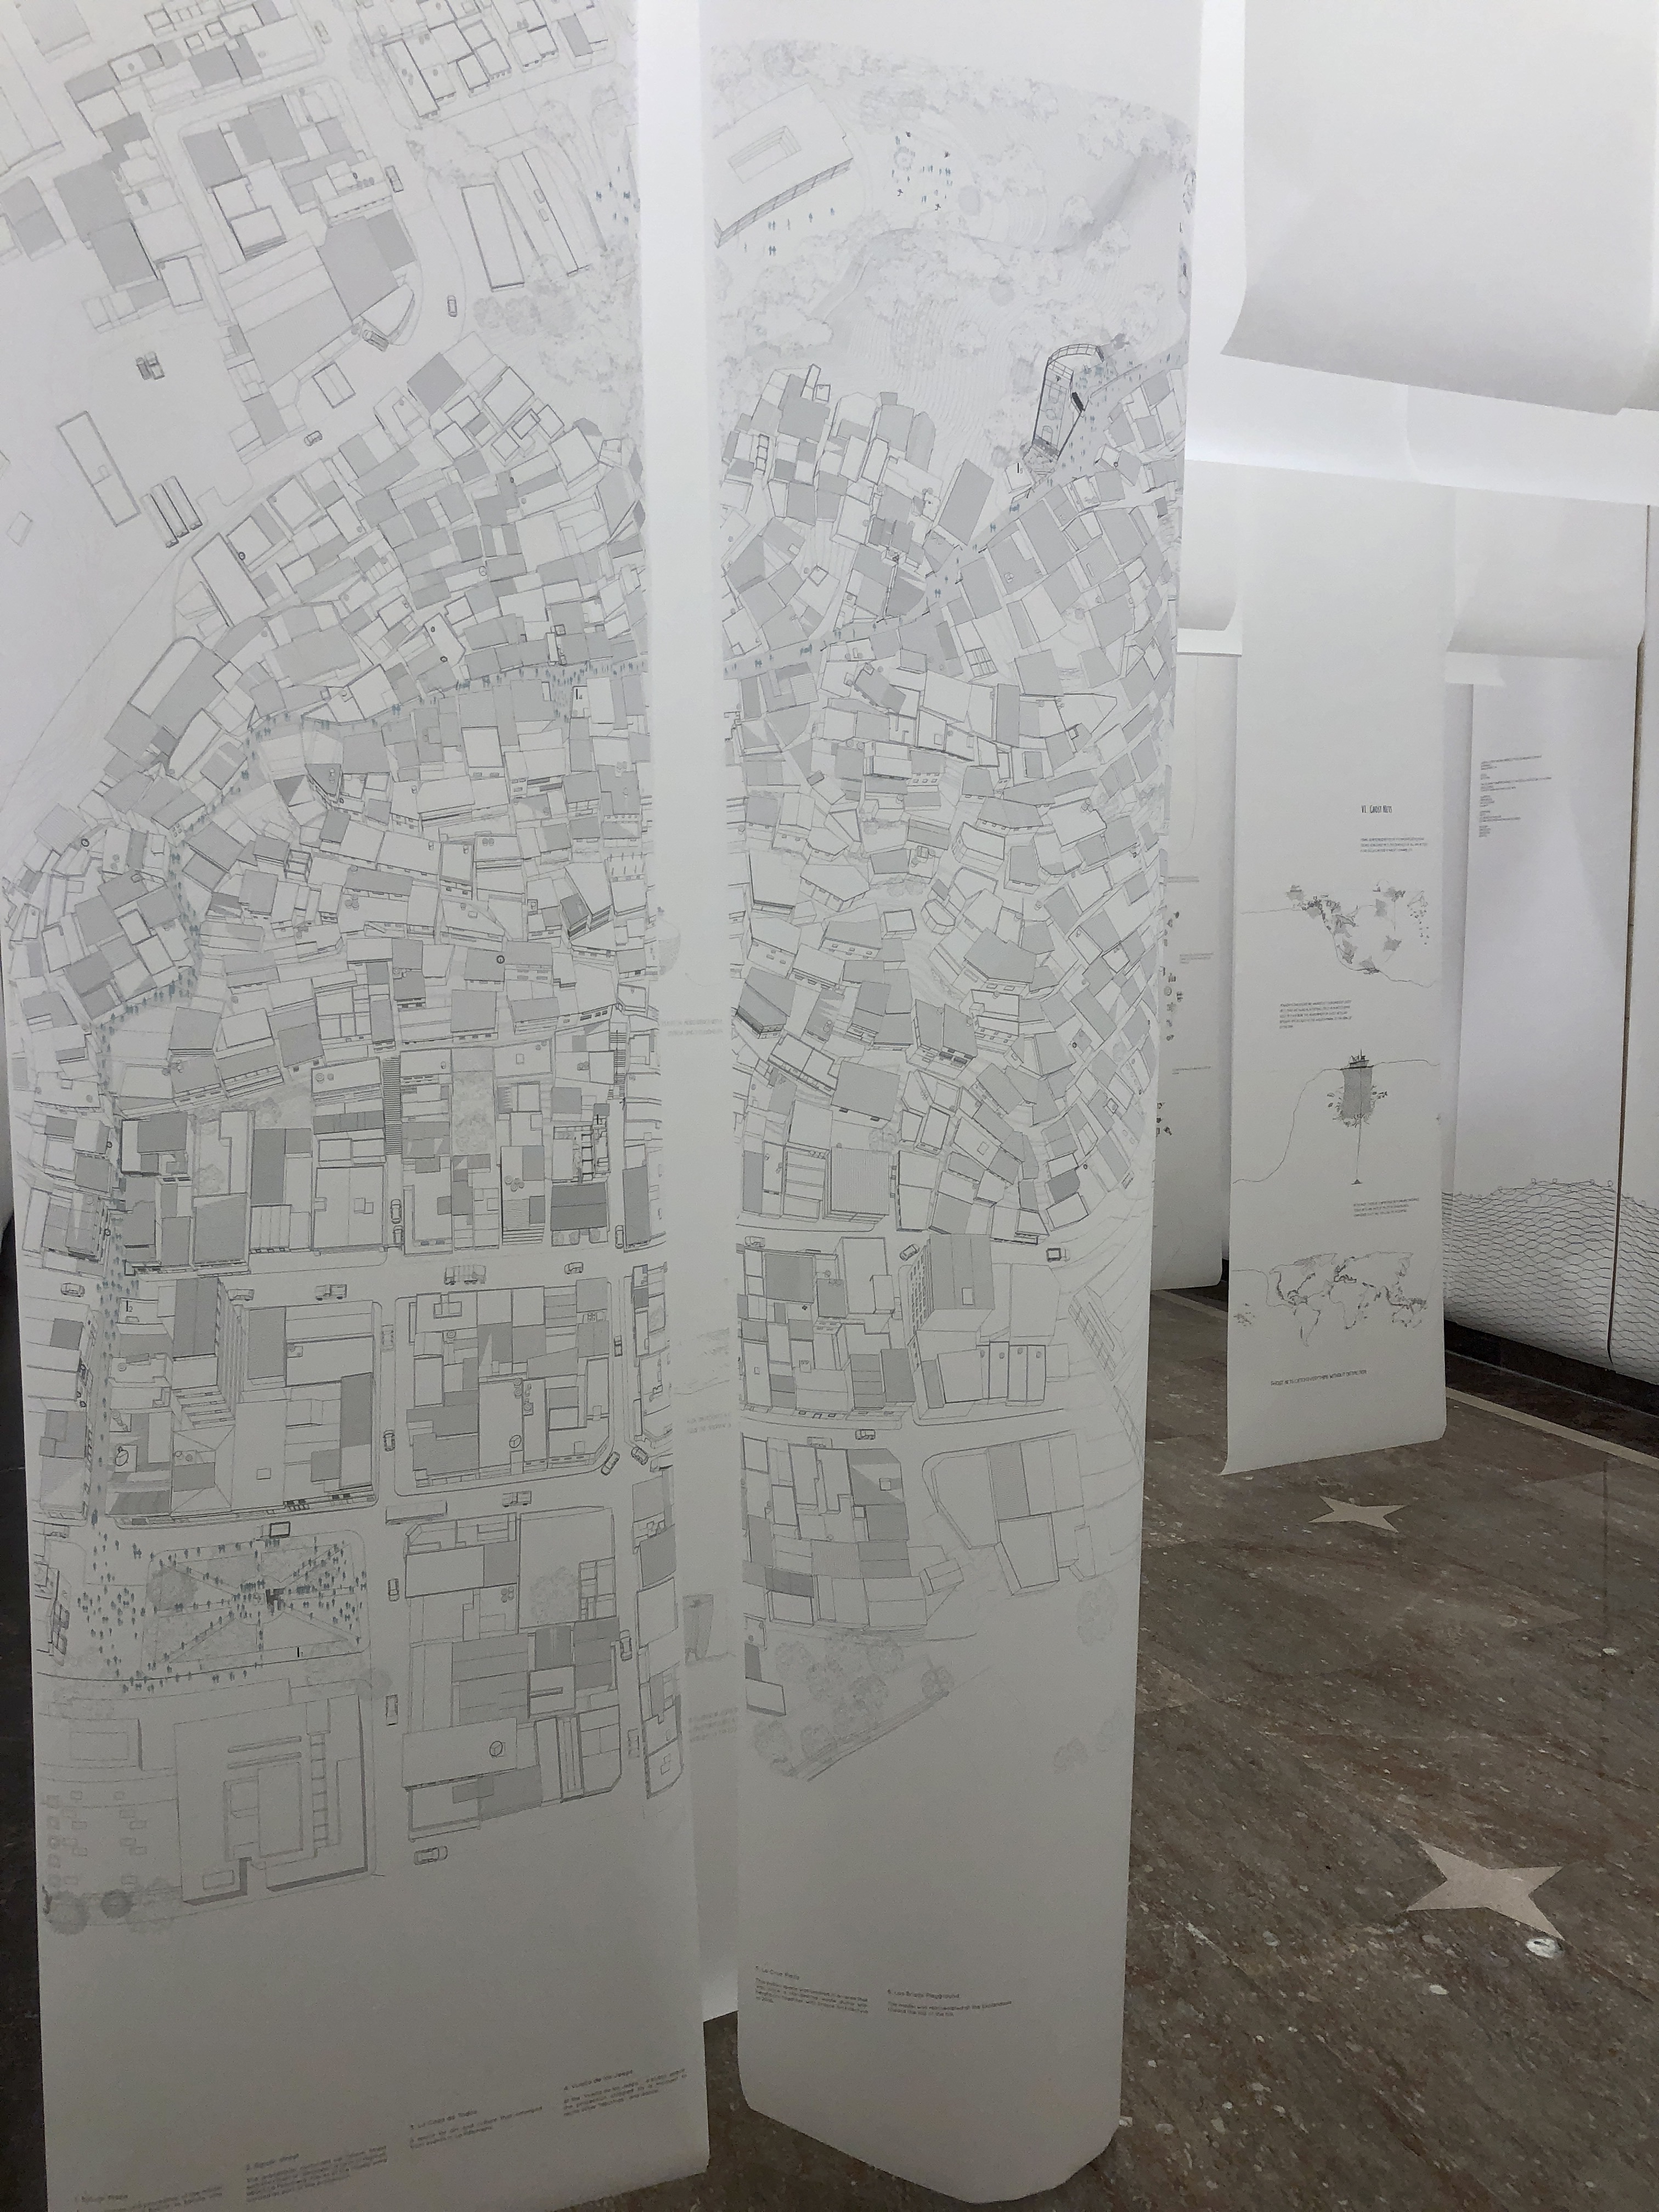 Exhibition “ON PAPER”